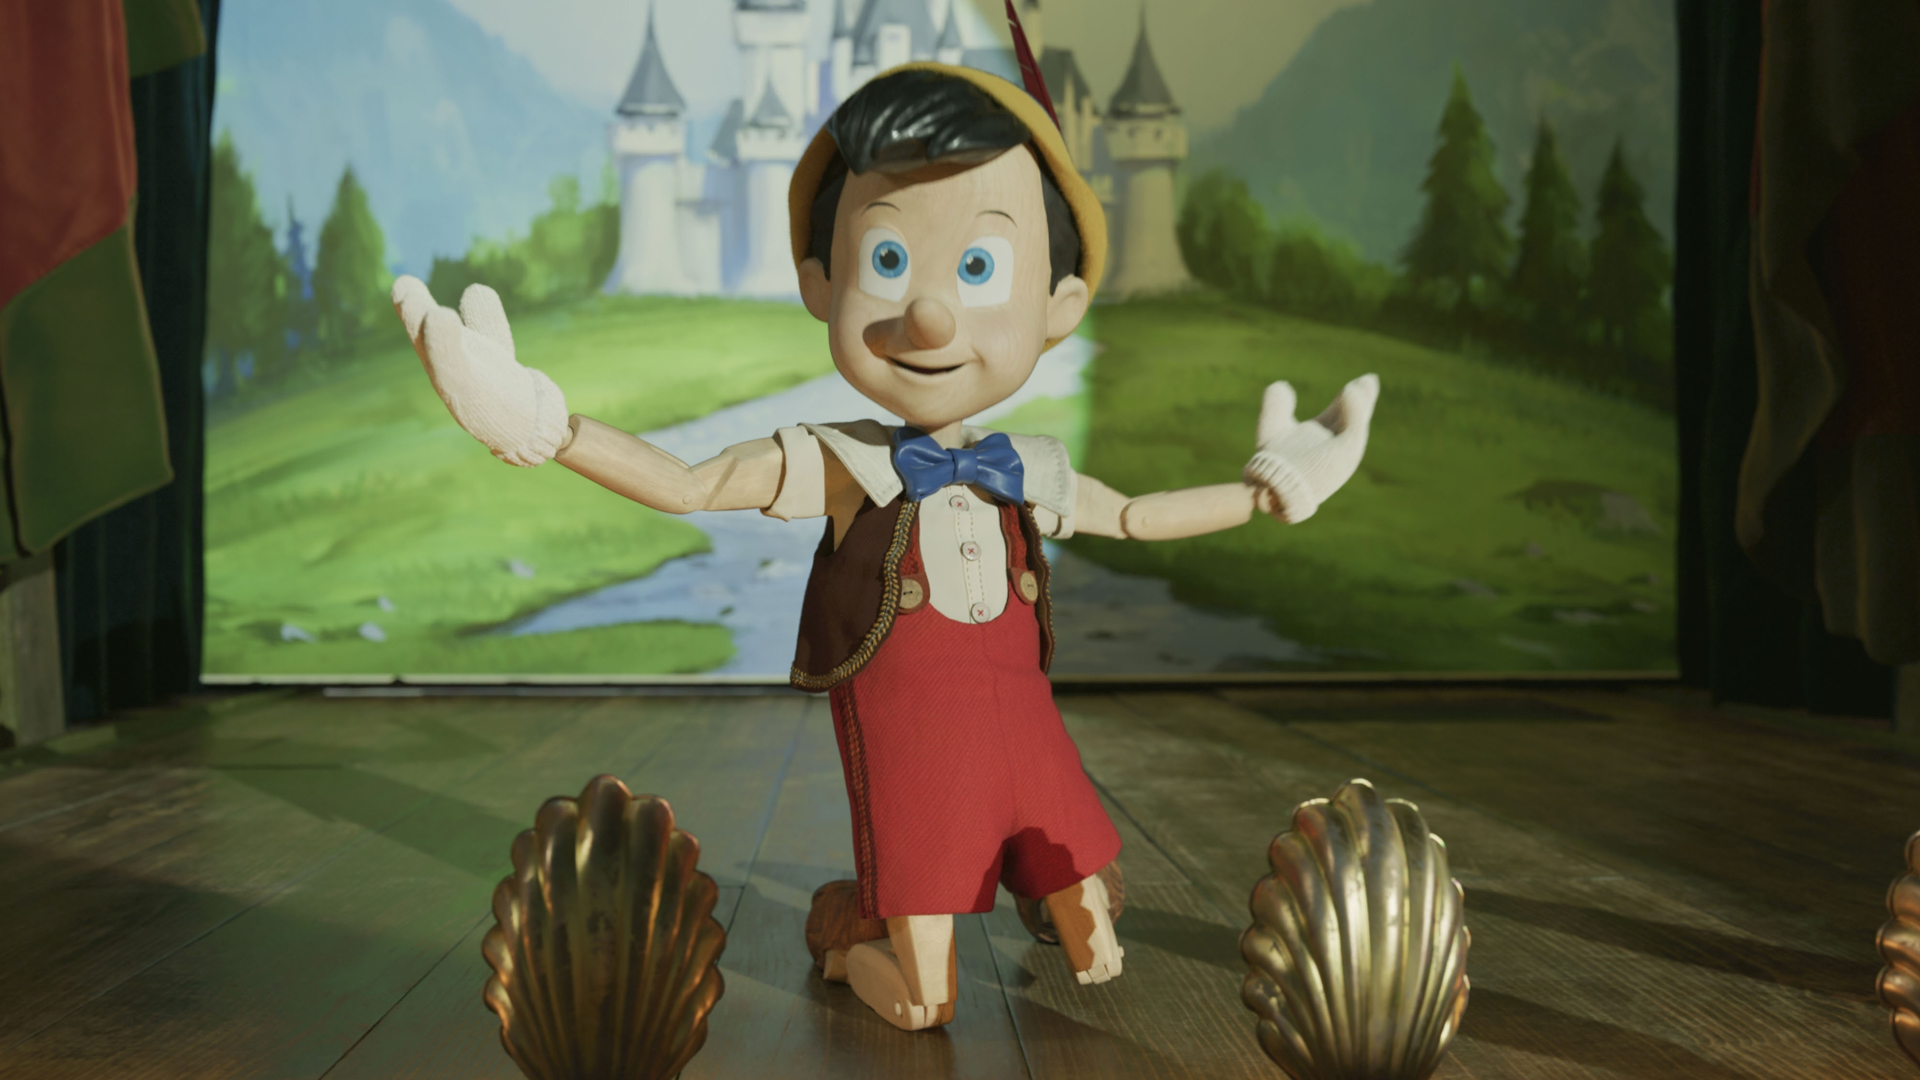 Pinocchio laps up the applause as he stars in Stromboli's act in the live-action Pinocchio remake